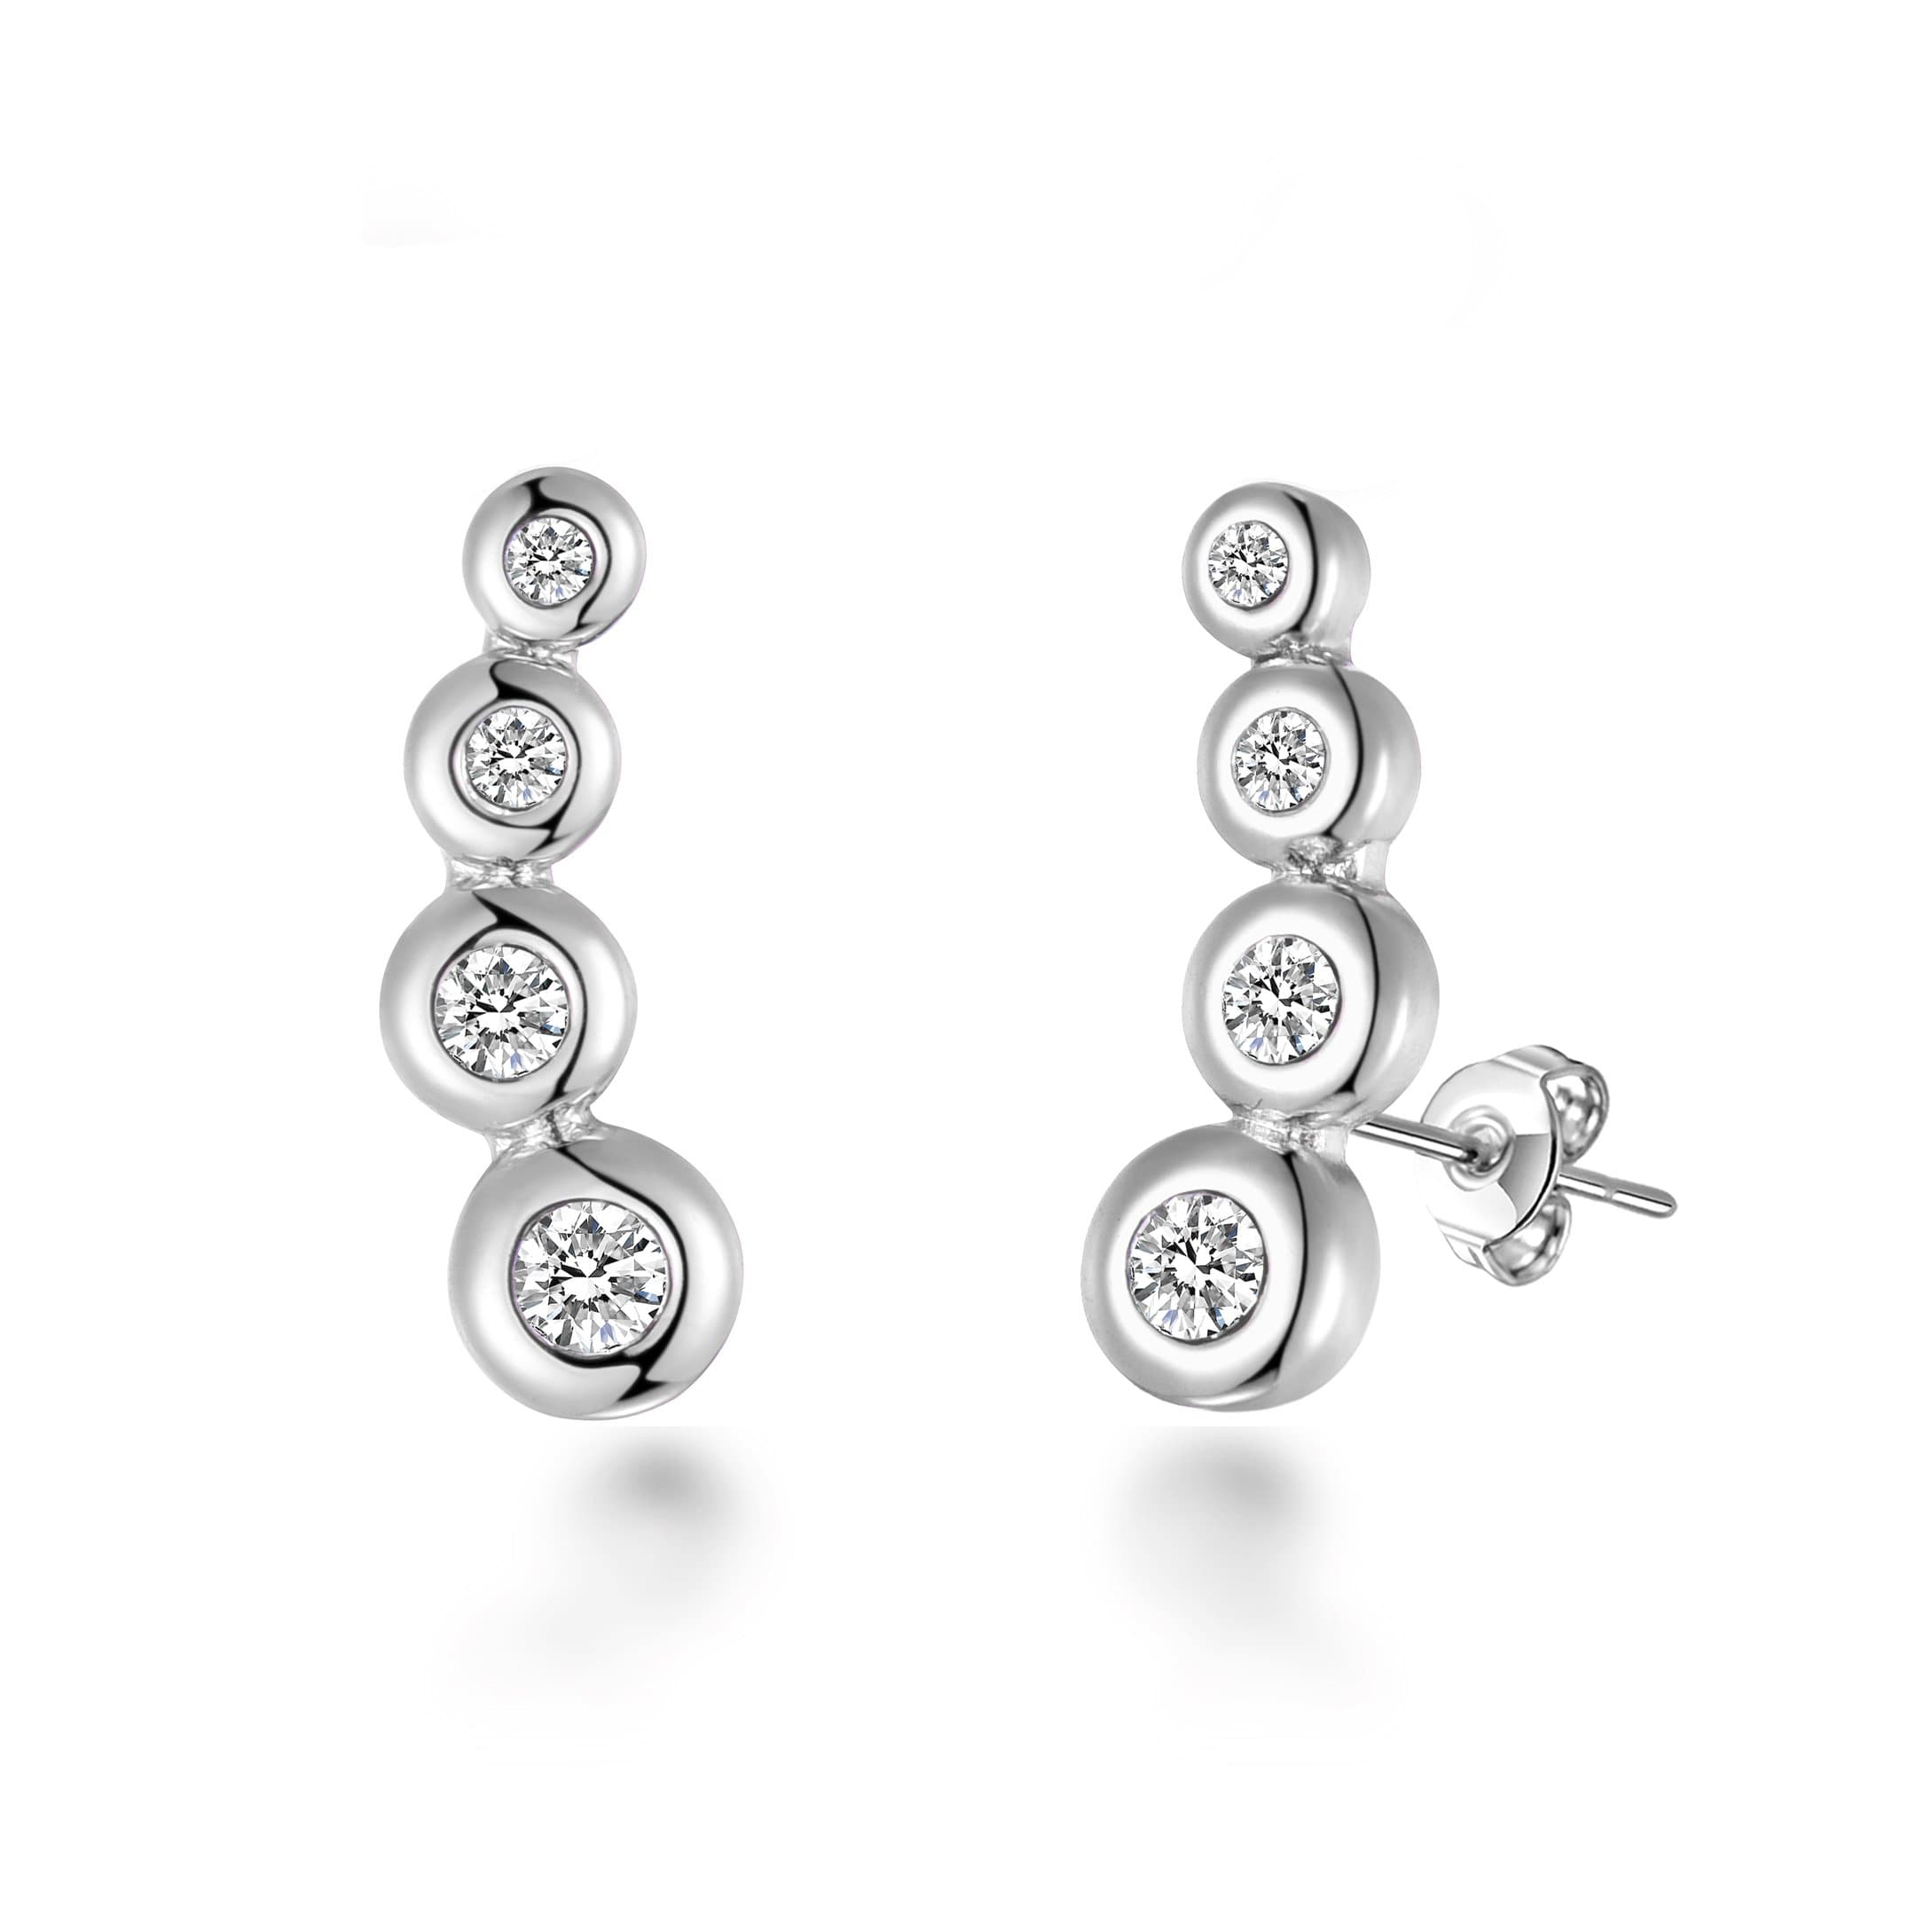 Silver Plated Four Stone Climber Earrings Created With Zircondia® Crystals by Philip Jones Jewellery